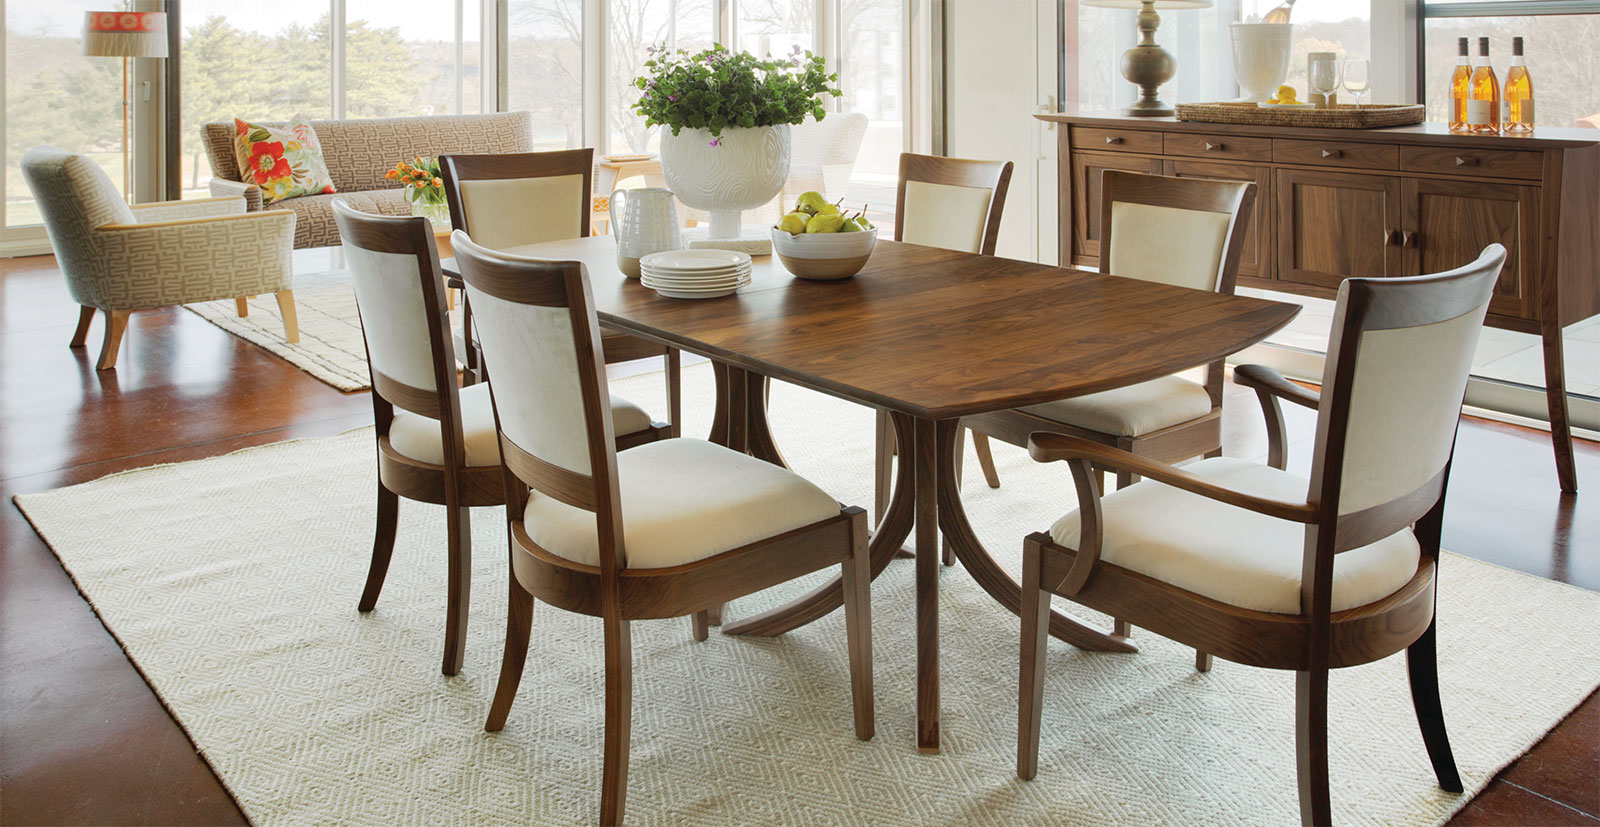 elegant dining room with walnut furniture and white upholstery